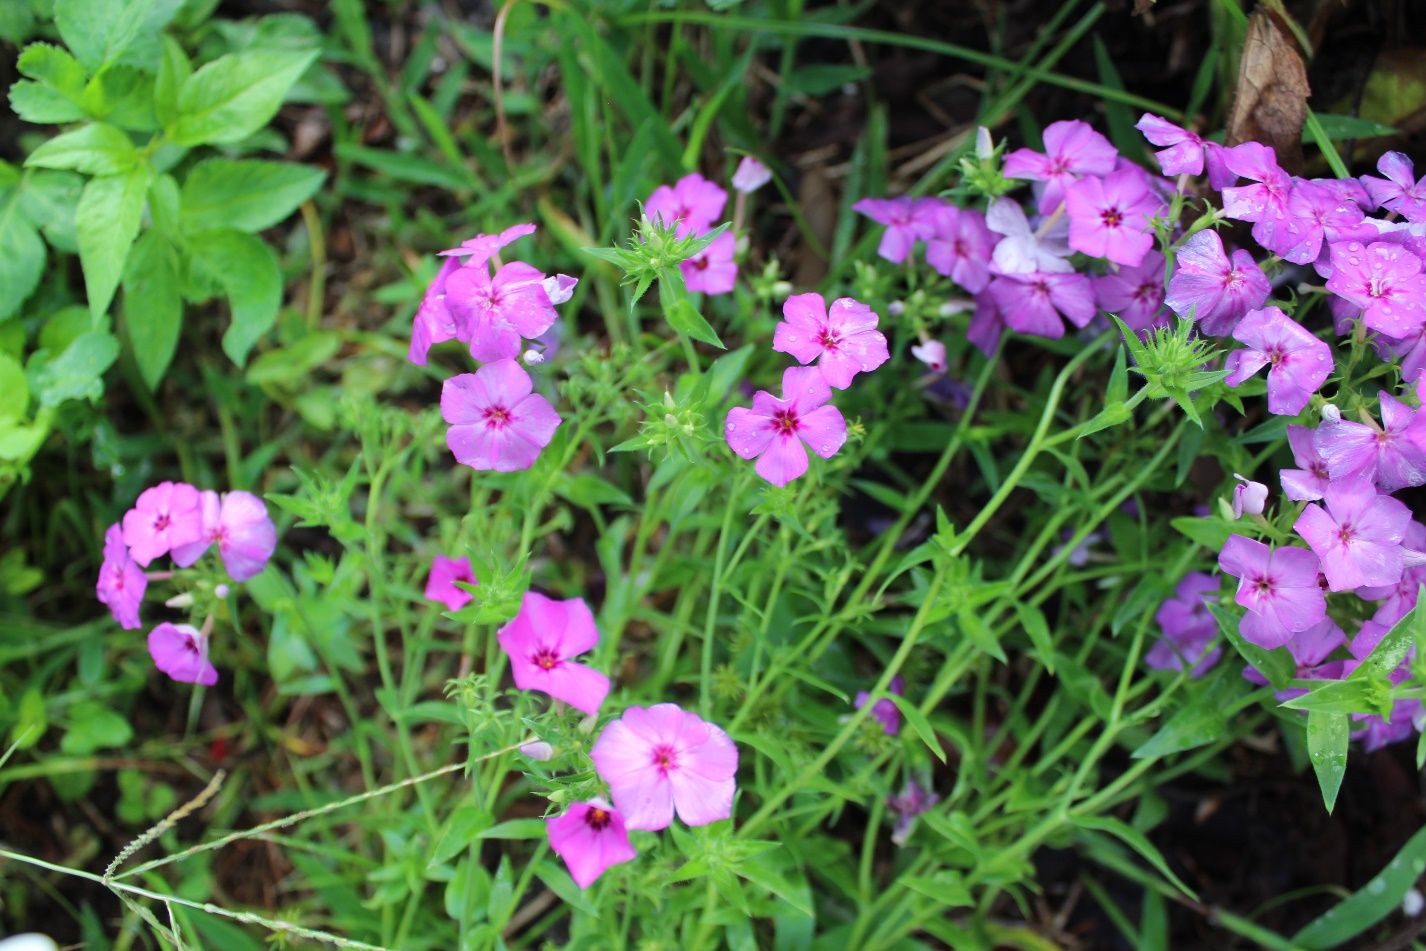 Phlox sp. growing after reseeding itself from a previous year. 